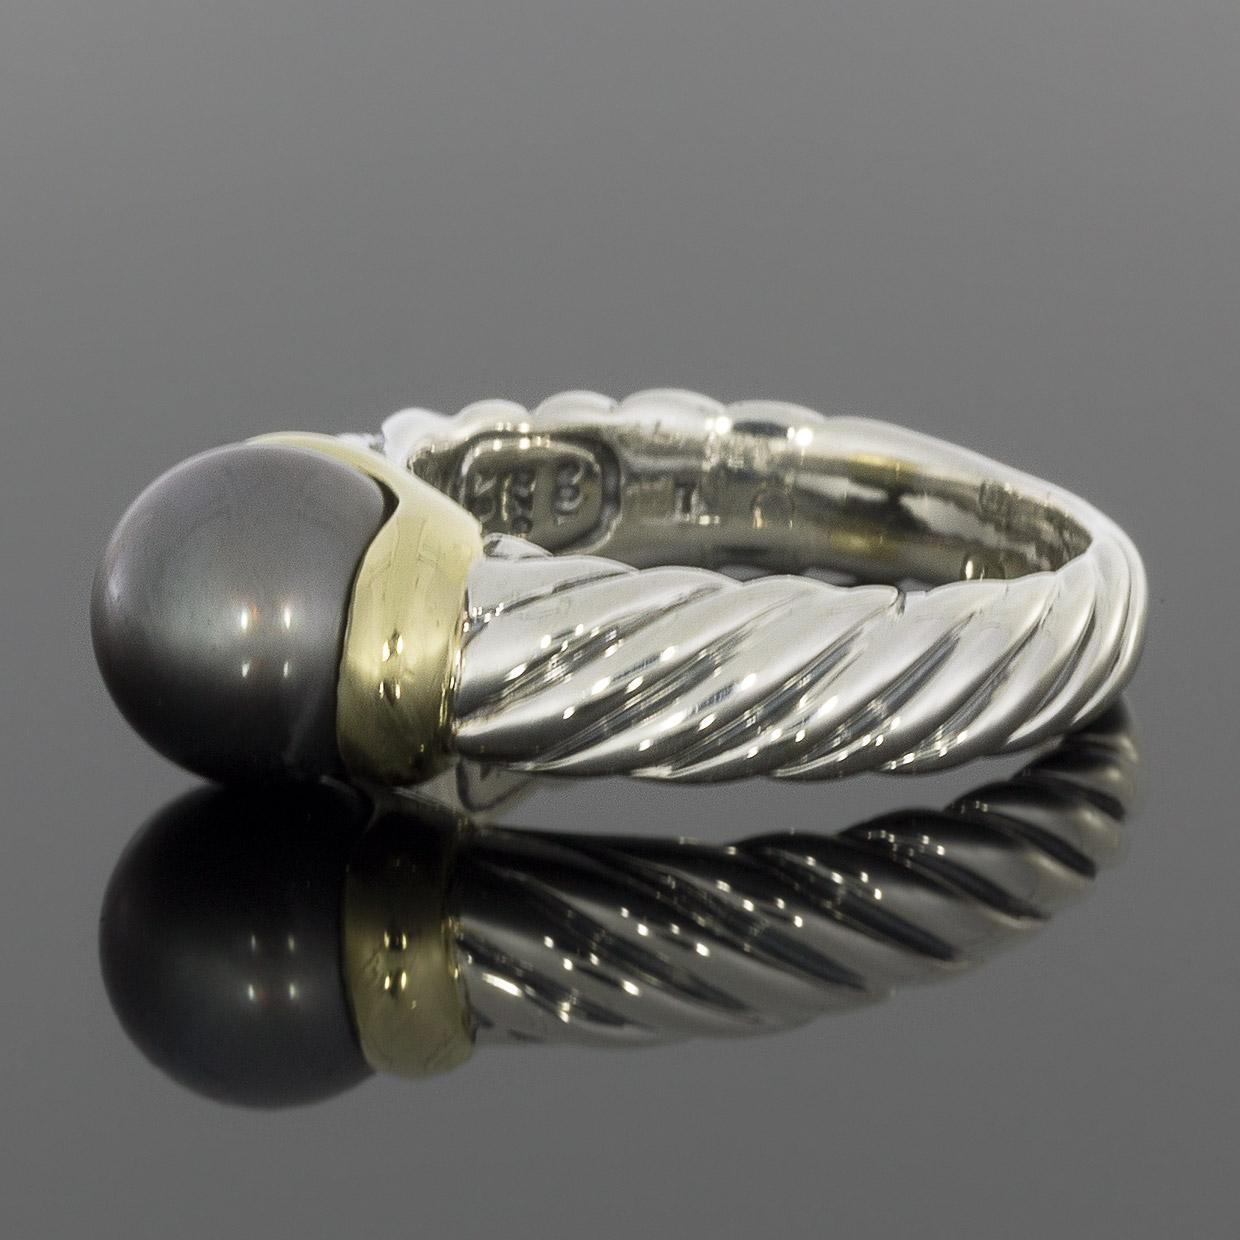 Item Details
Main Stone Shape Cultured
Main Stone Treatment Not Enhanced
Main Stone Creation Cultured
Main Stone Pearl
Main Stone Color Bk
Estimated Retail $575.00
Brand David Yurman
Collection Cable
Metal Sterling Silver
Style Cocktail
Ring Size